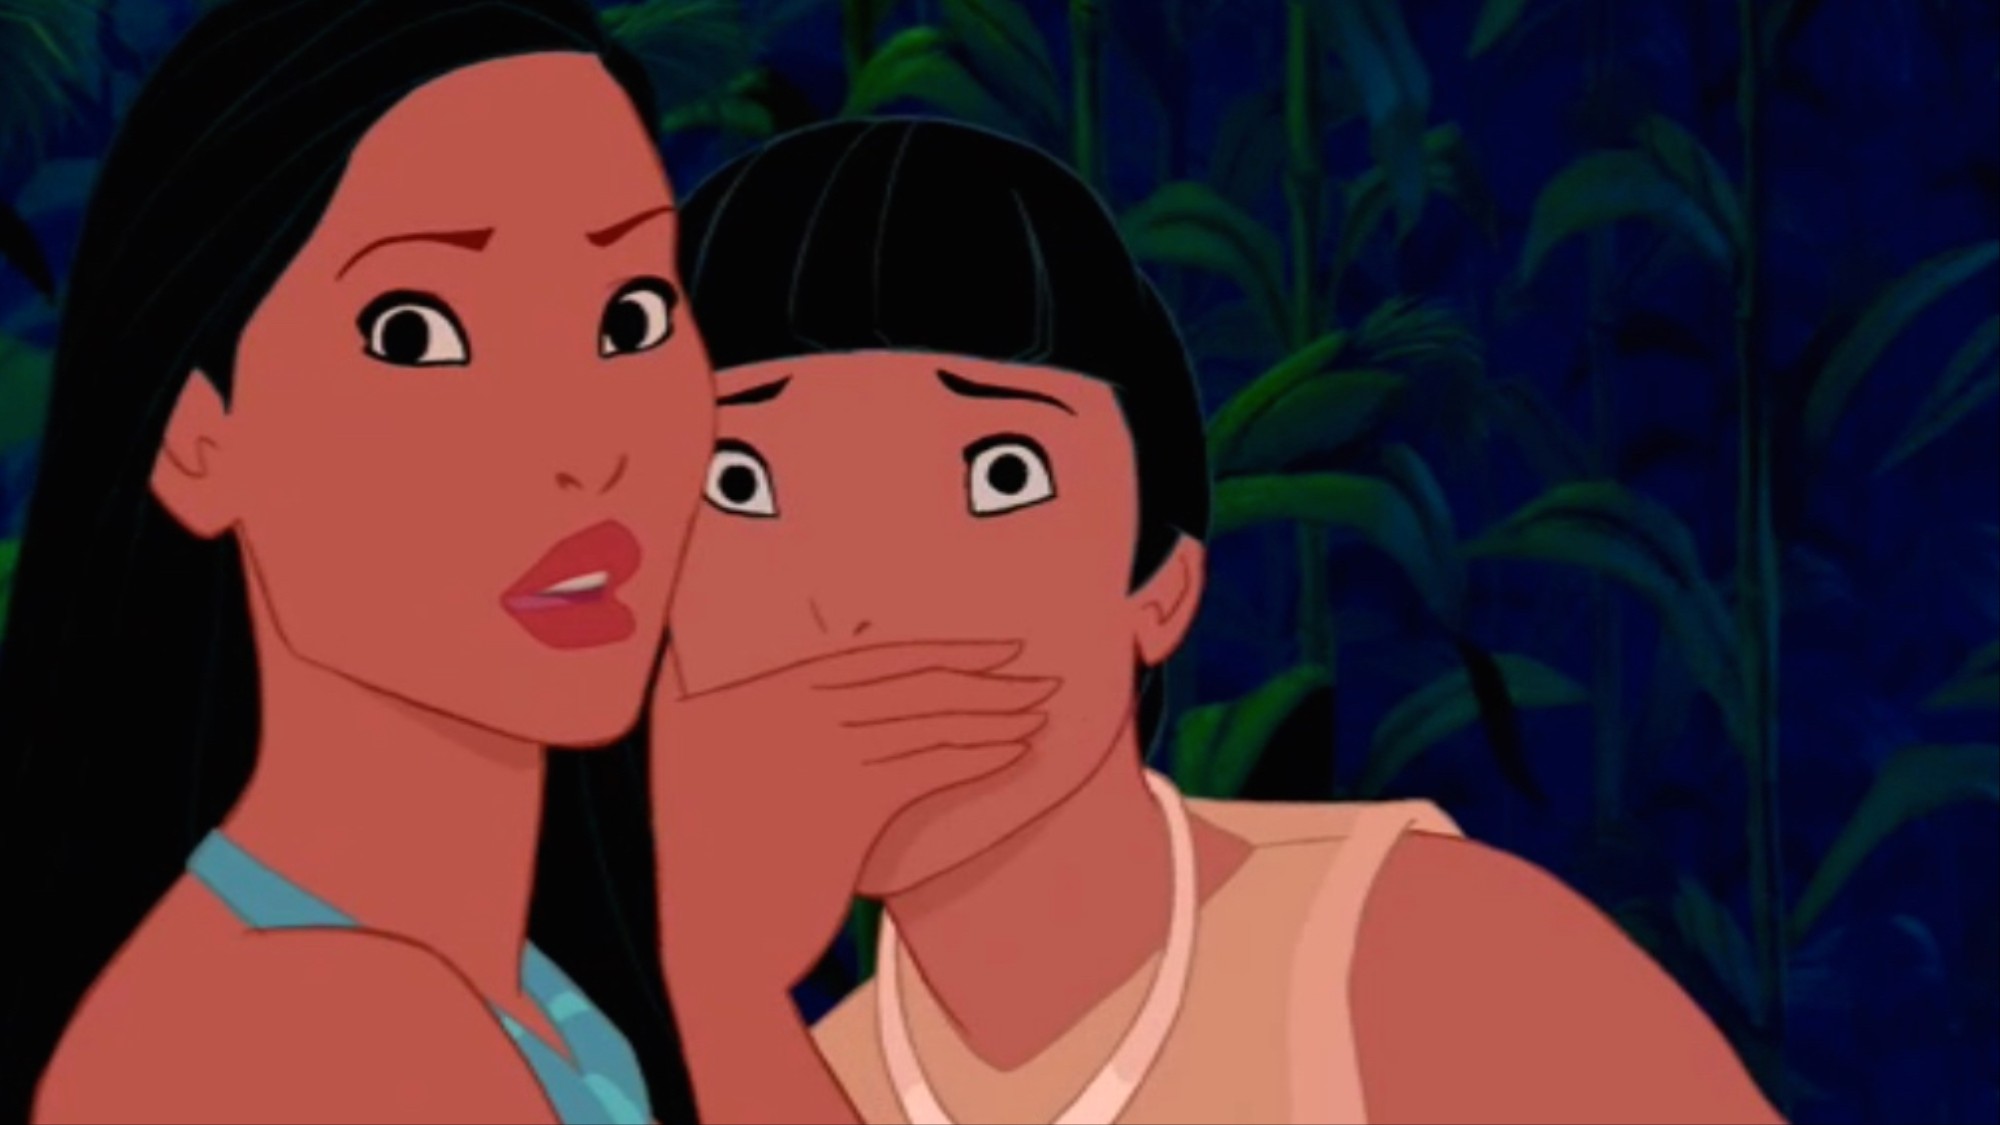 Native American Cartoon Girl Nude - All the Cartoon Characters from My Childhood Were Queer - VICE